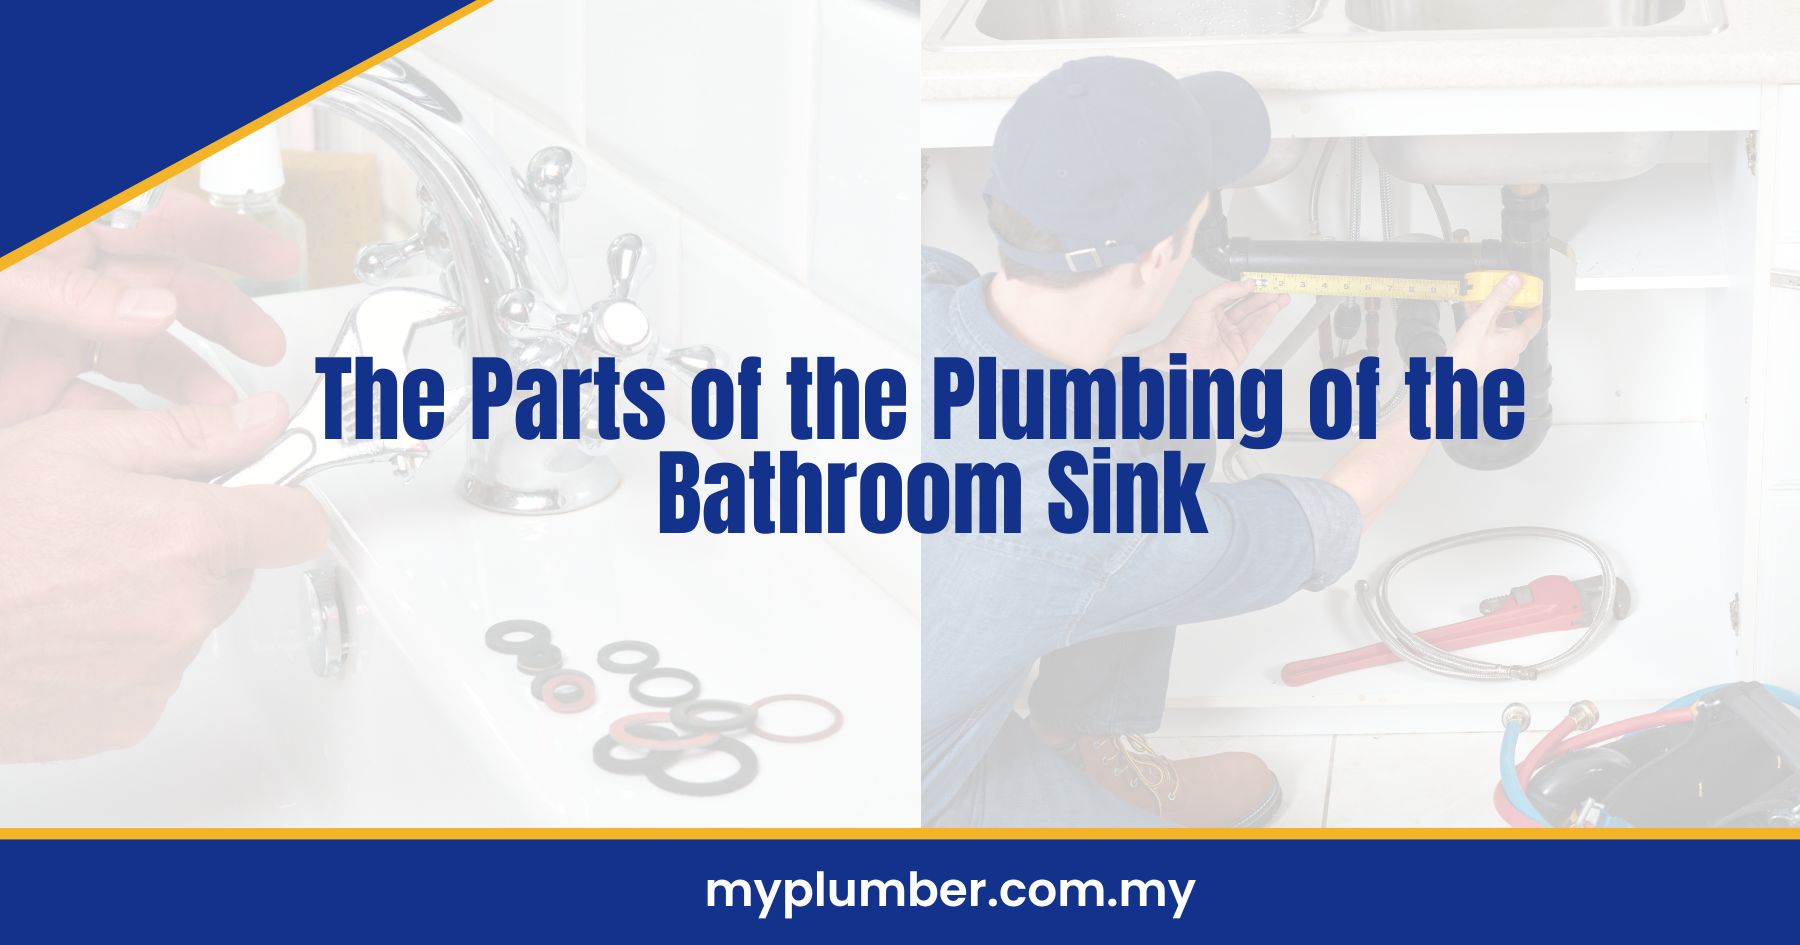 The Parts of the Plumbing of the Bathroom Sink